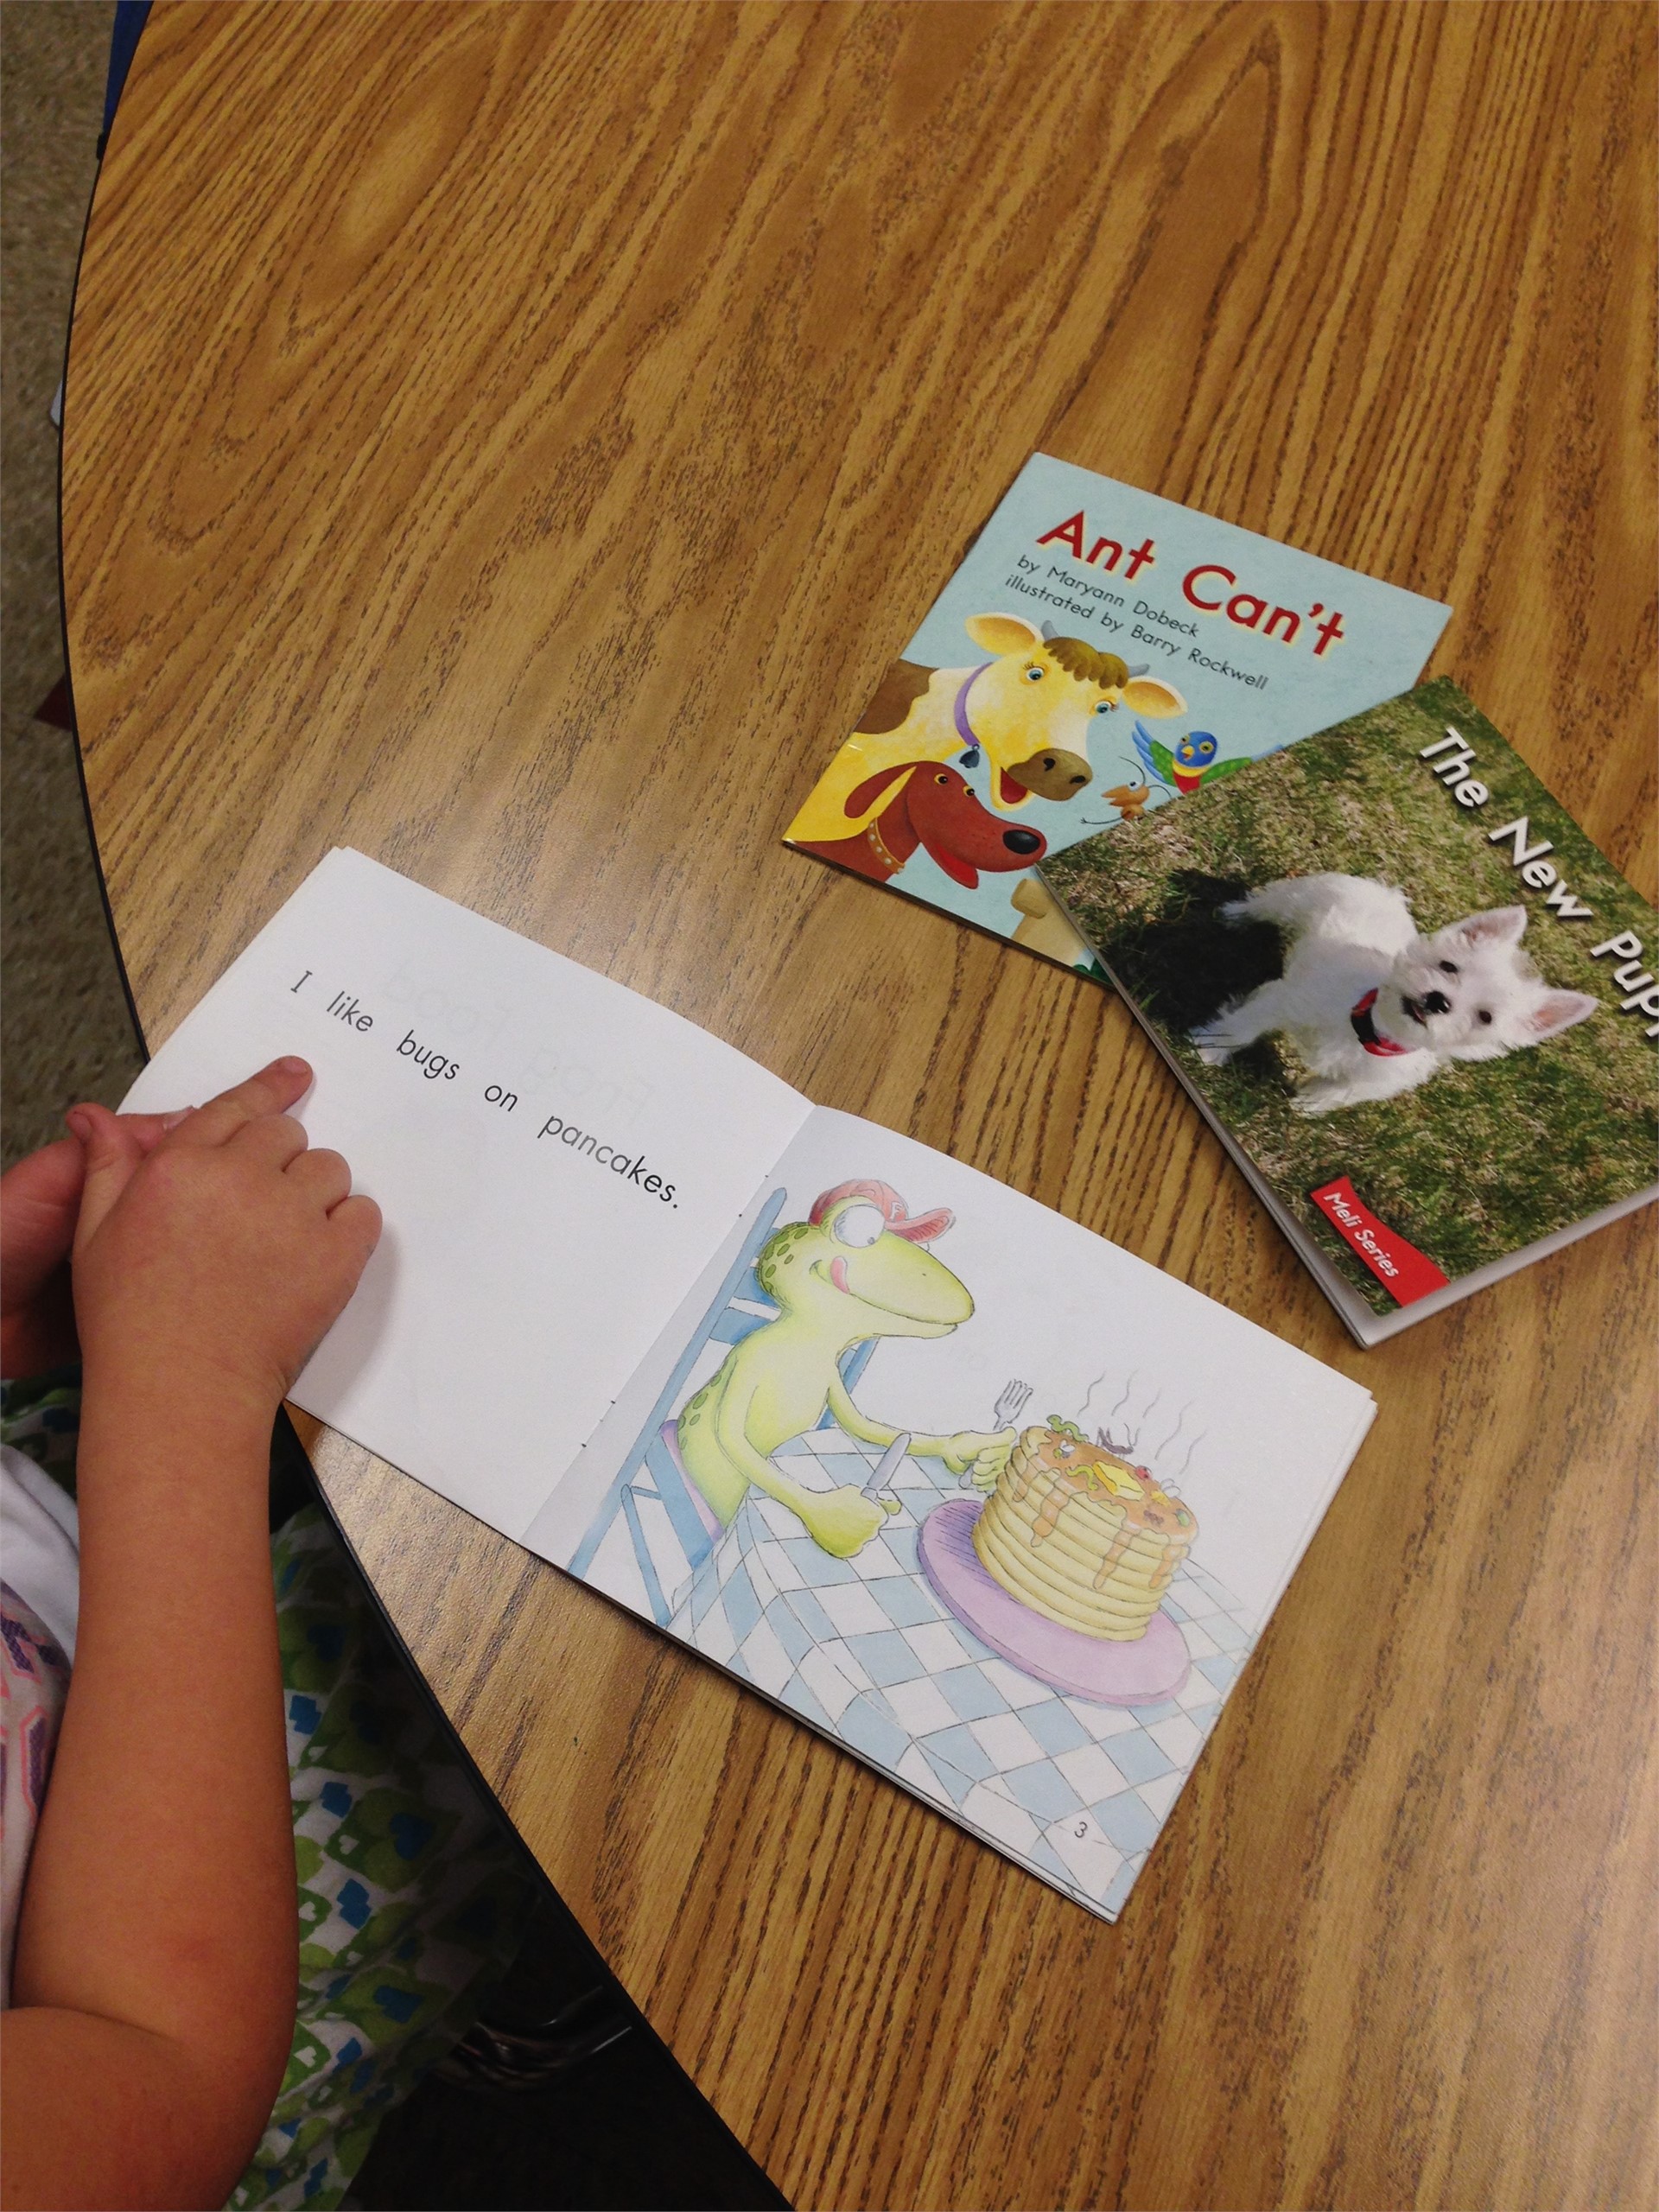 Students begin each lesson by rereading familiar books.